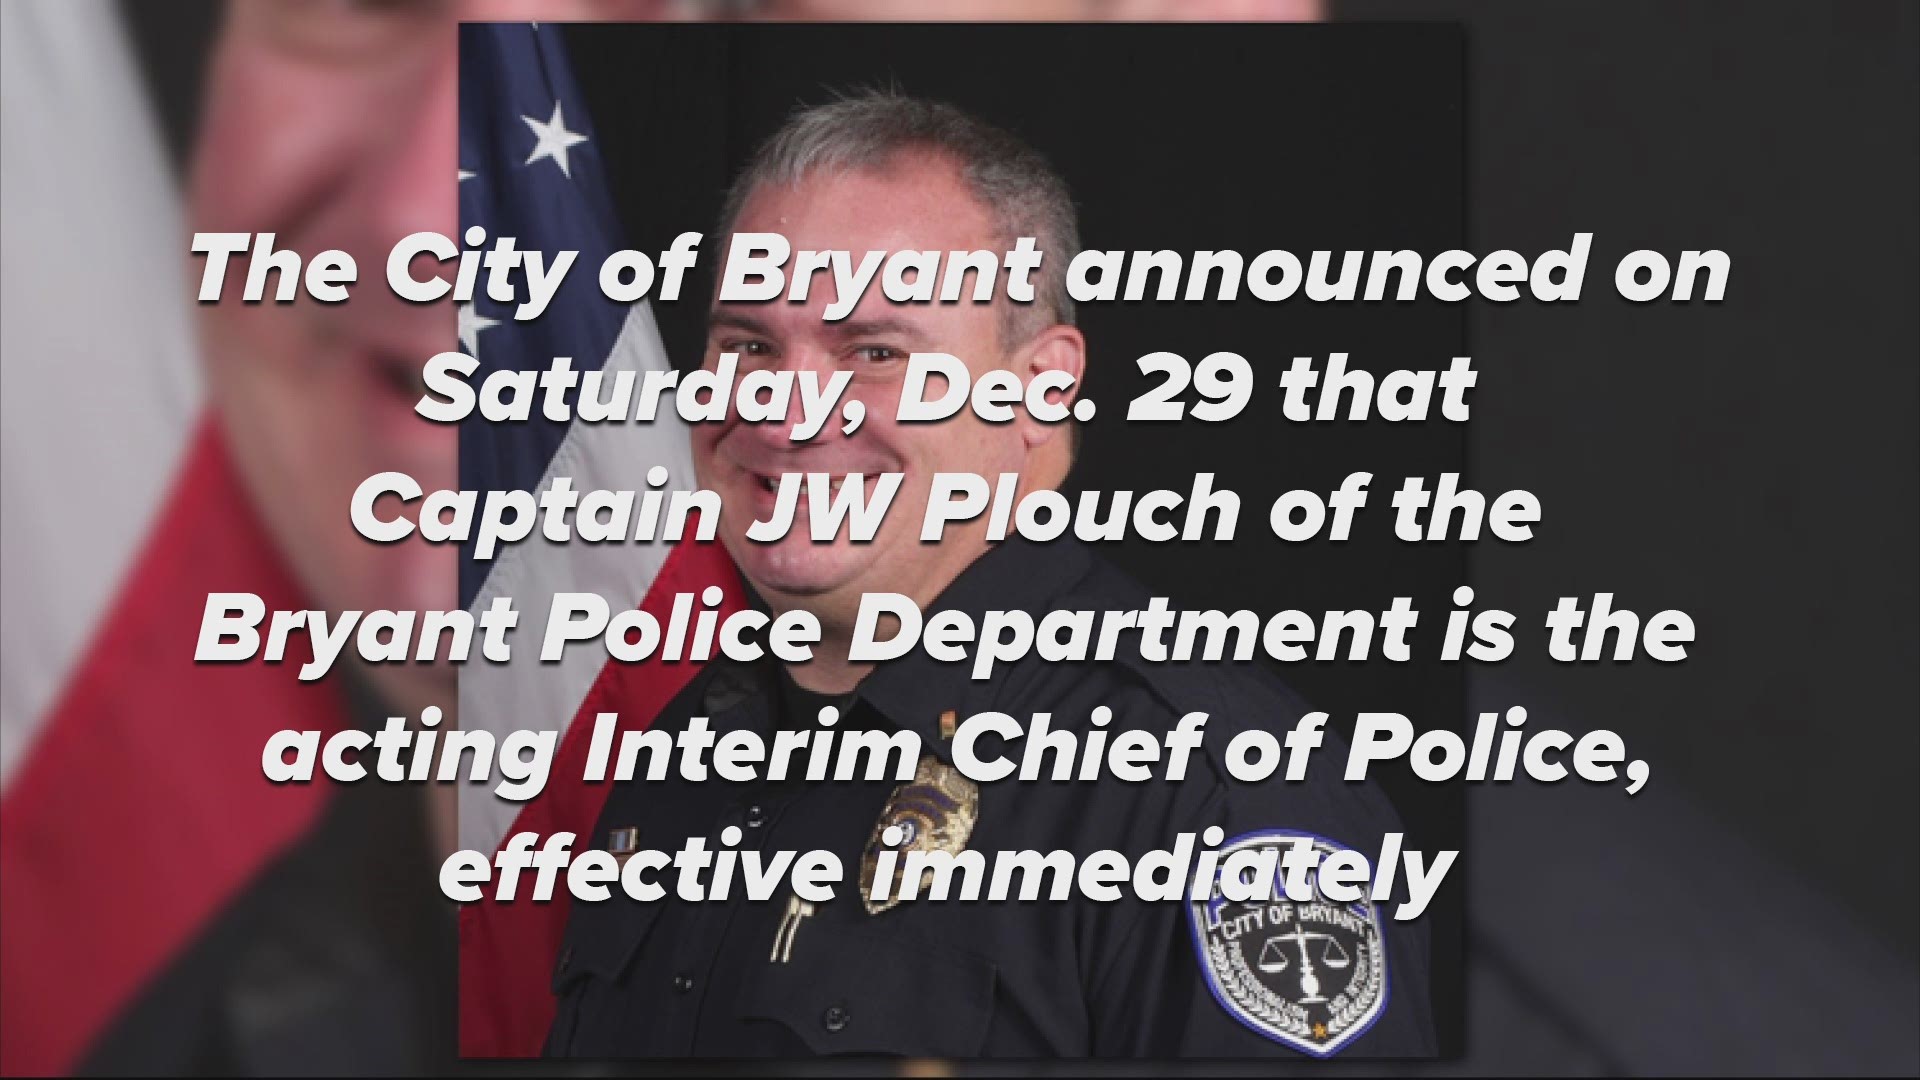 The City of Bryant announced Saturday, Dec. 29 that Captain Plouch would start as interim chief effective immediately